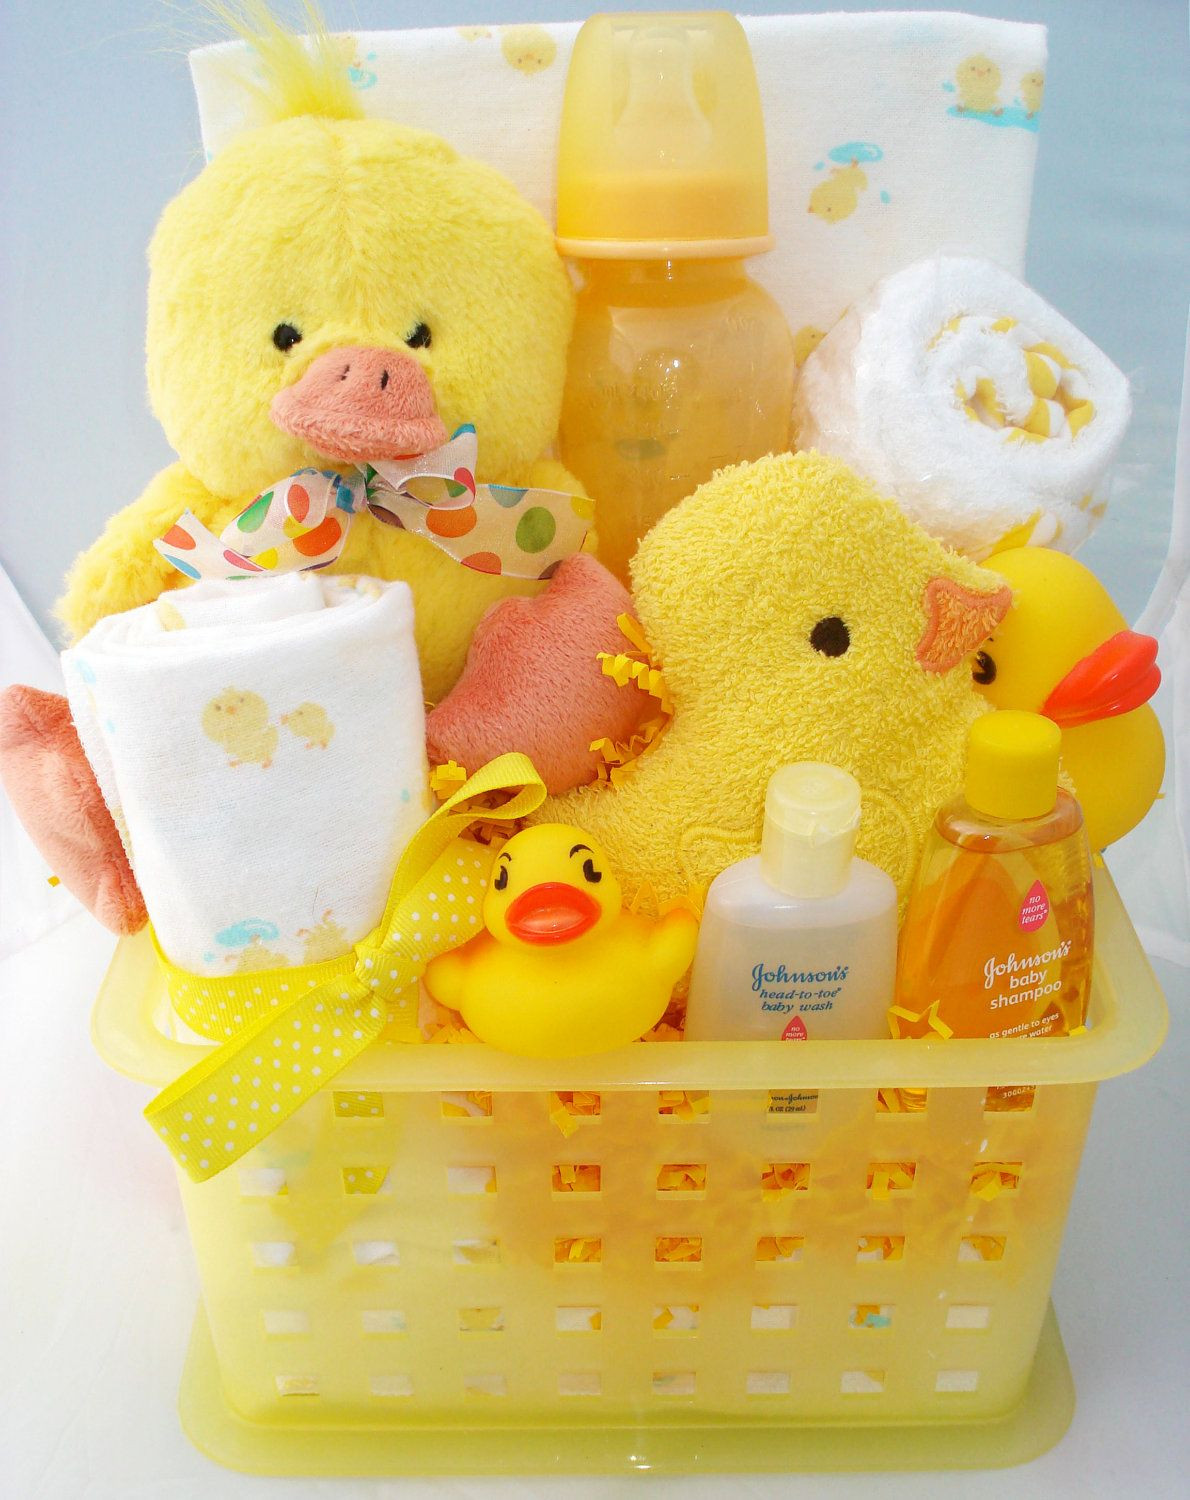 Cute Gift Ideas For Baby Shower
 Ducky Baby Gift Cute baby shower t idea for baby